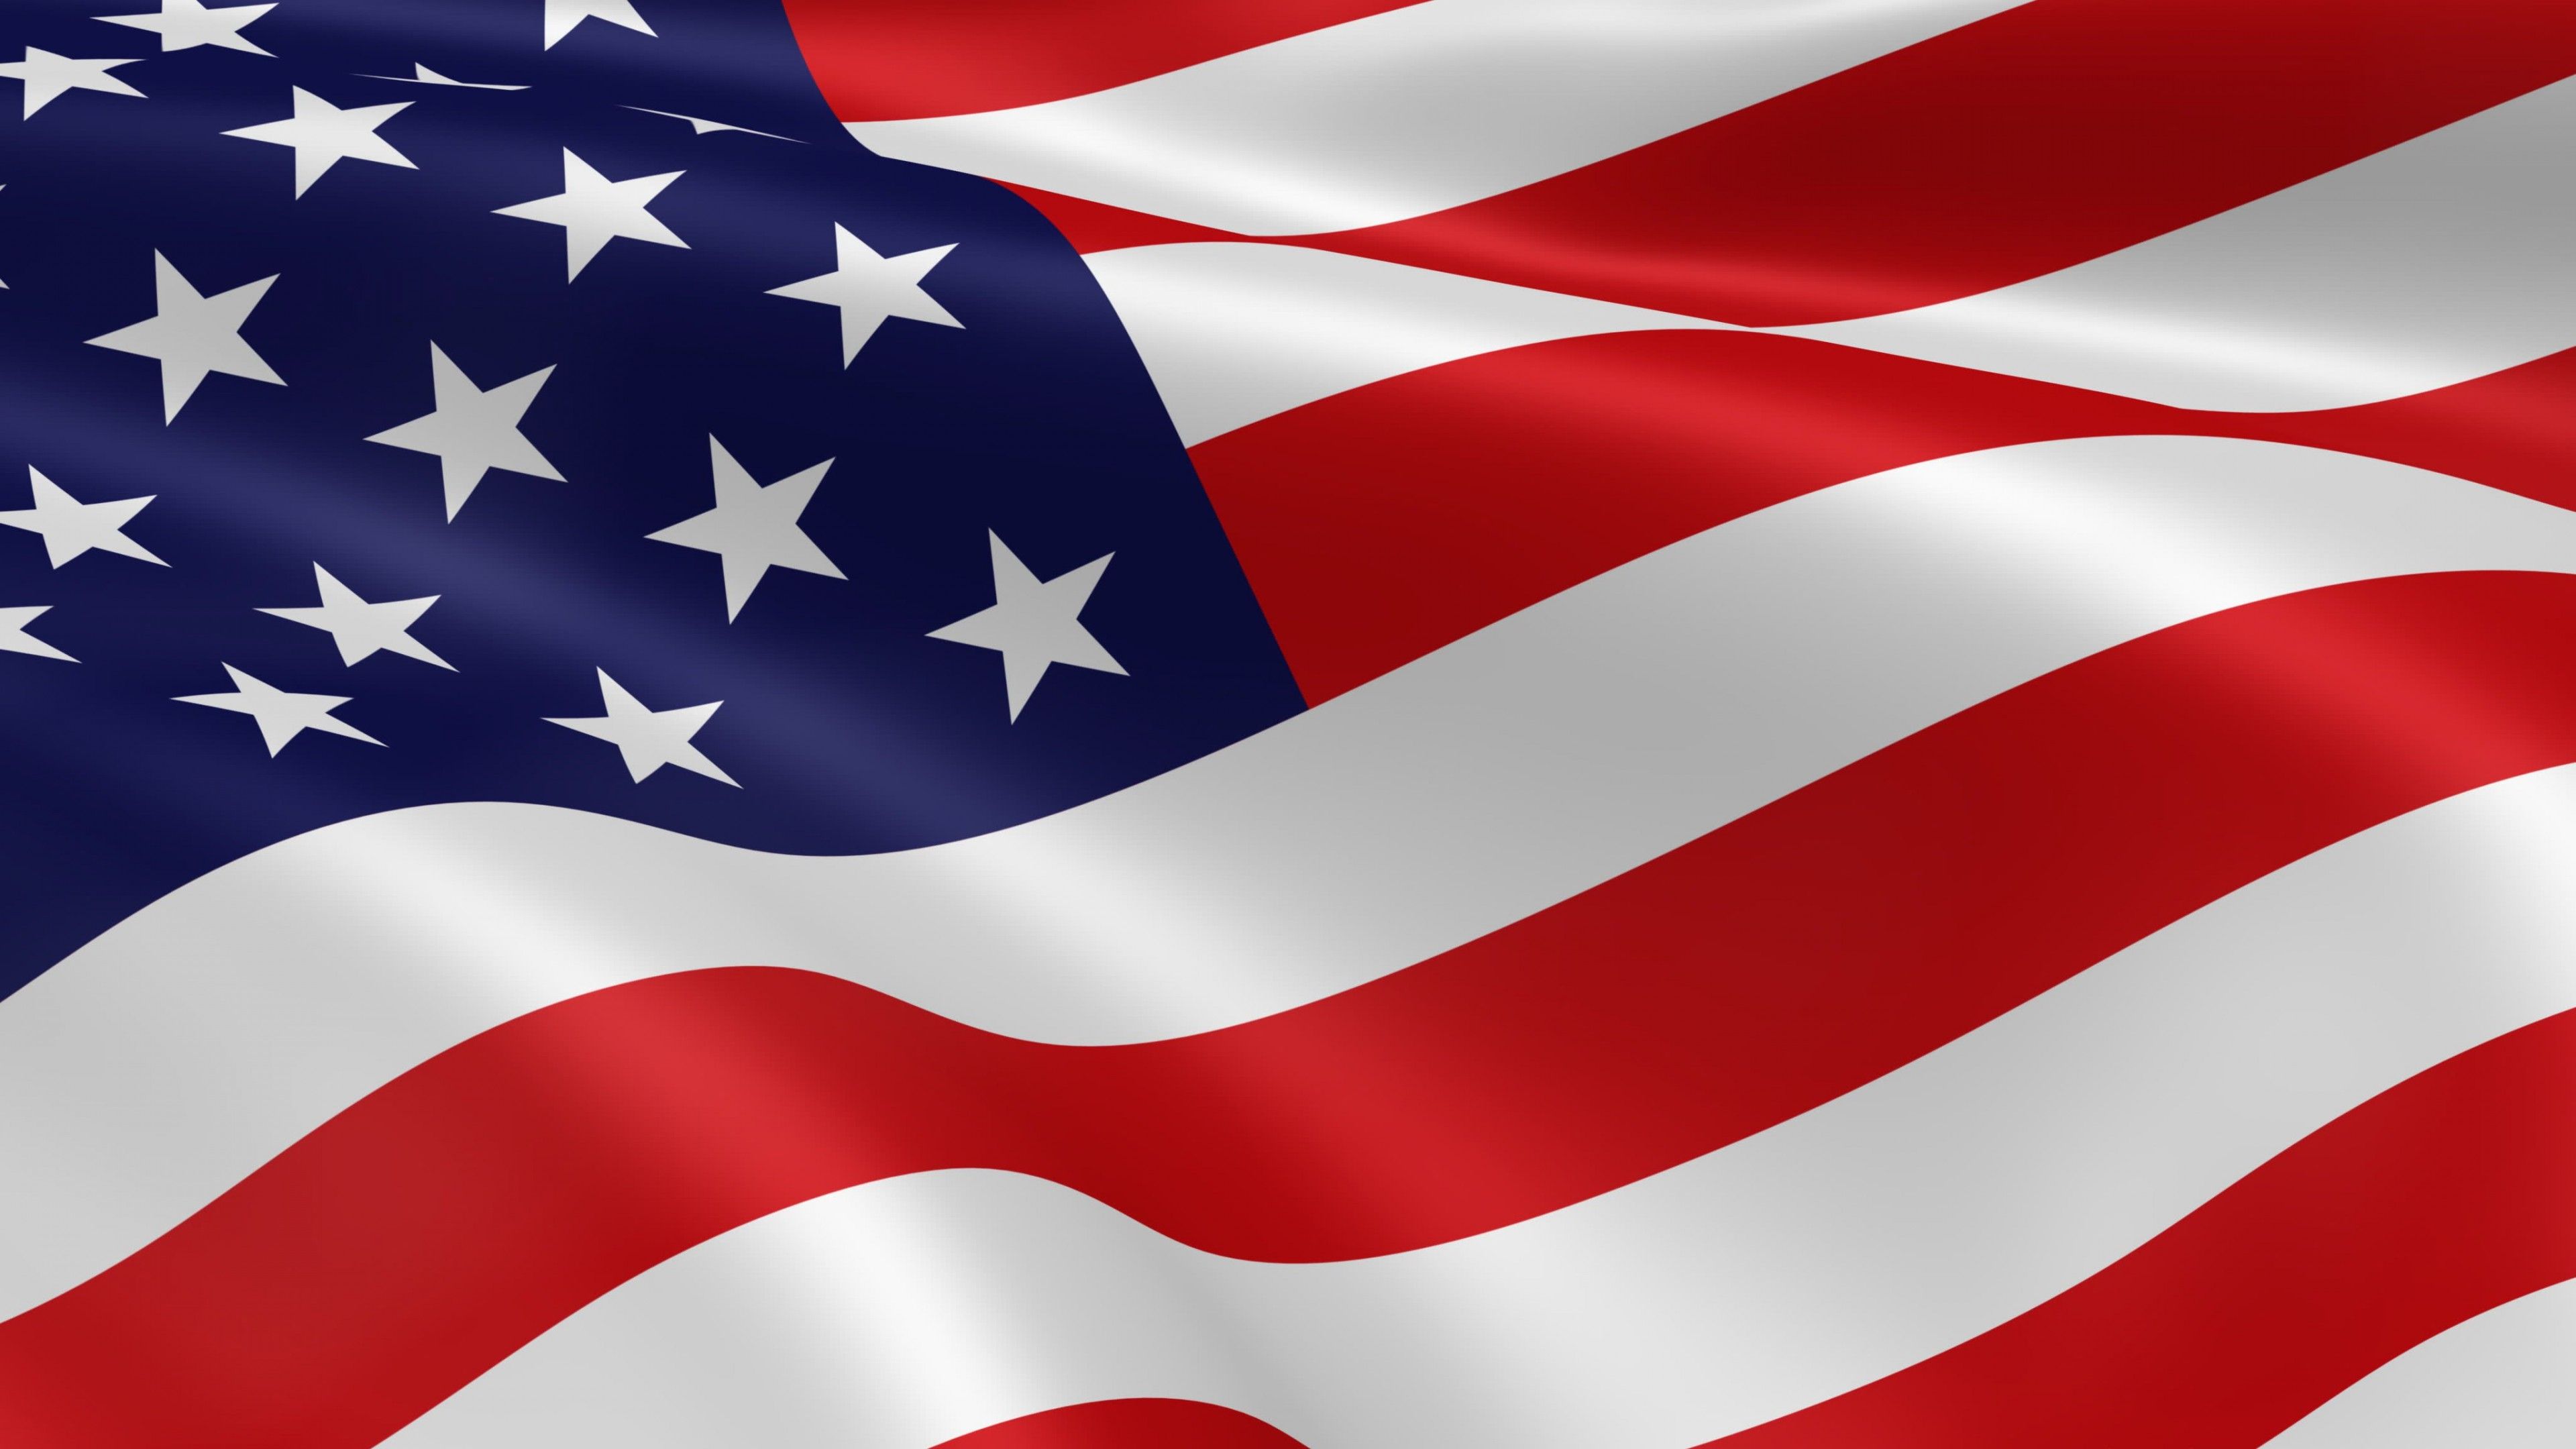 Flag Day Wallpaper Free Flag Day Background